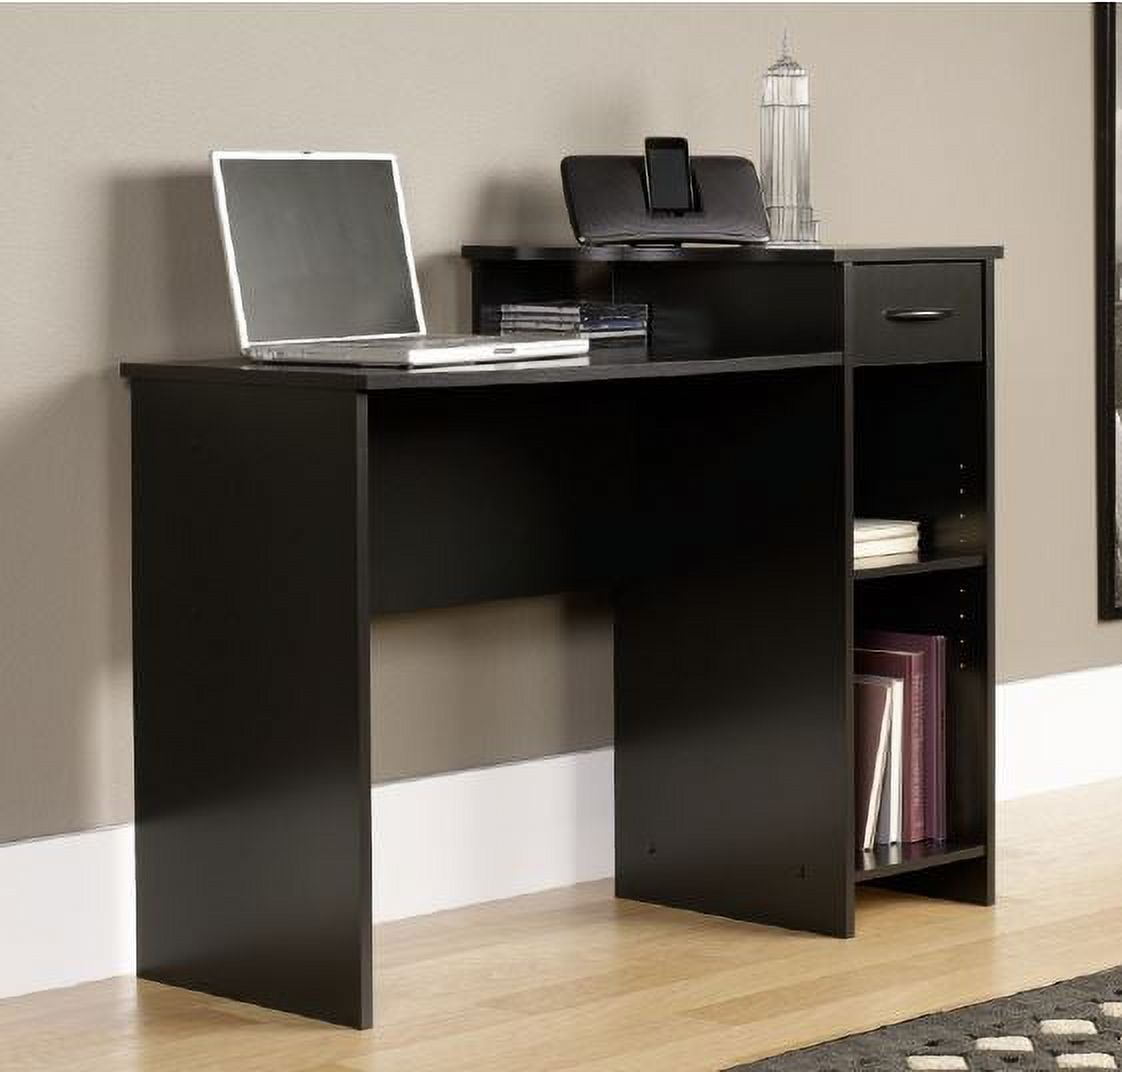 Mainstays Student Desk with Easy-glide Drawer, Blackwood Finish - image 4 of 6